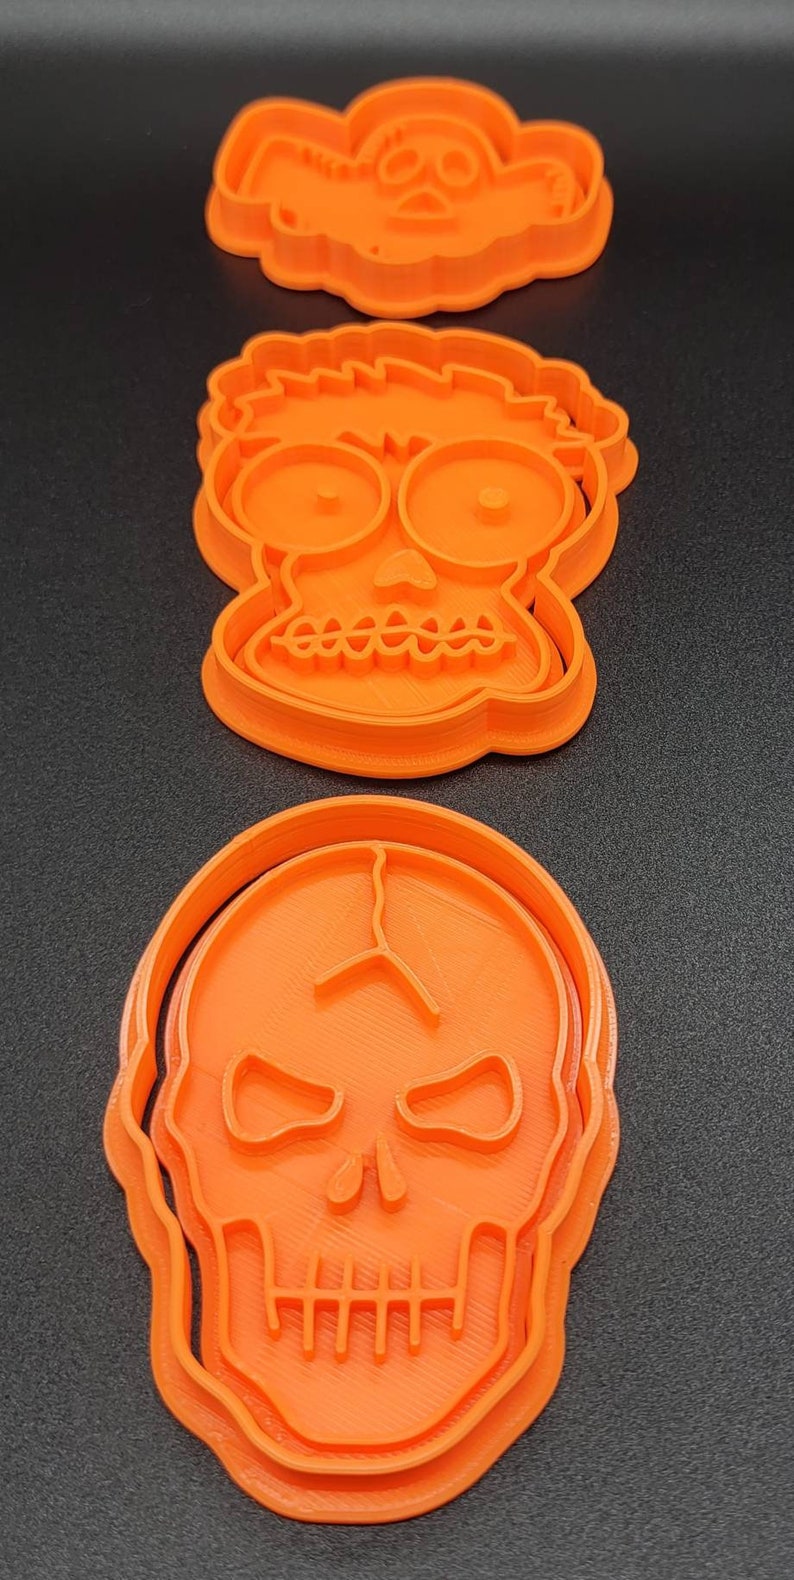 3D Printed Assorted Halloween Cookie Cutters & Stamps SunshineT Shop